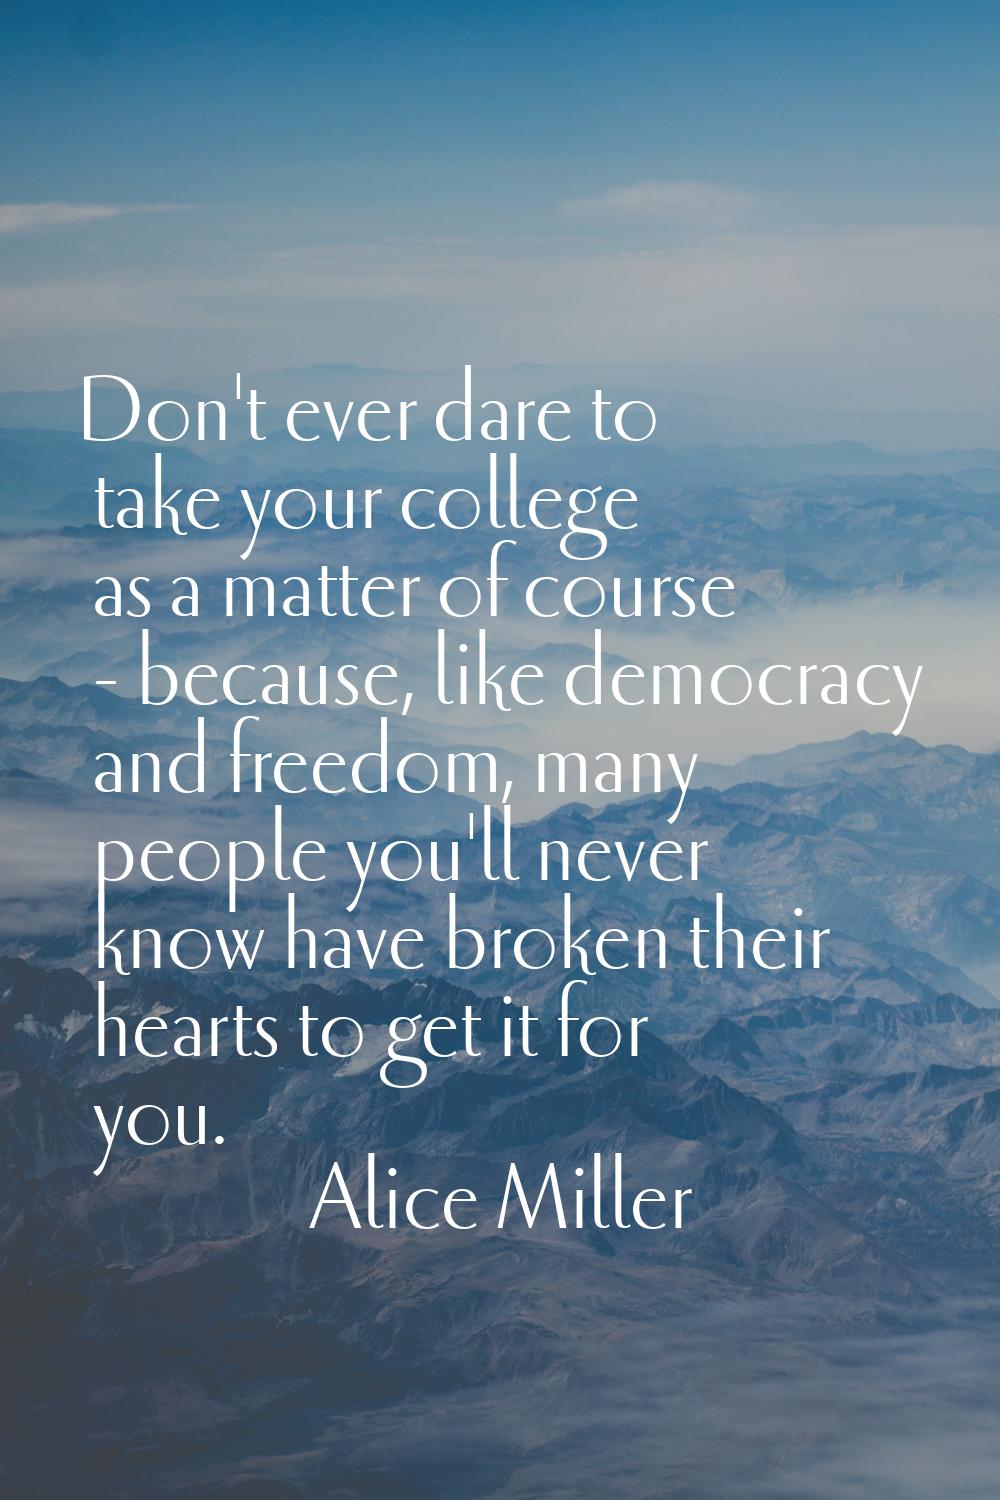 Don't ever dare to take your college as a matter of course - because, like democracy and freedom, m